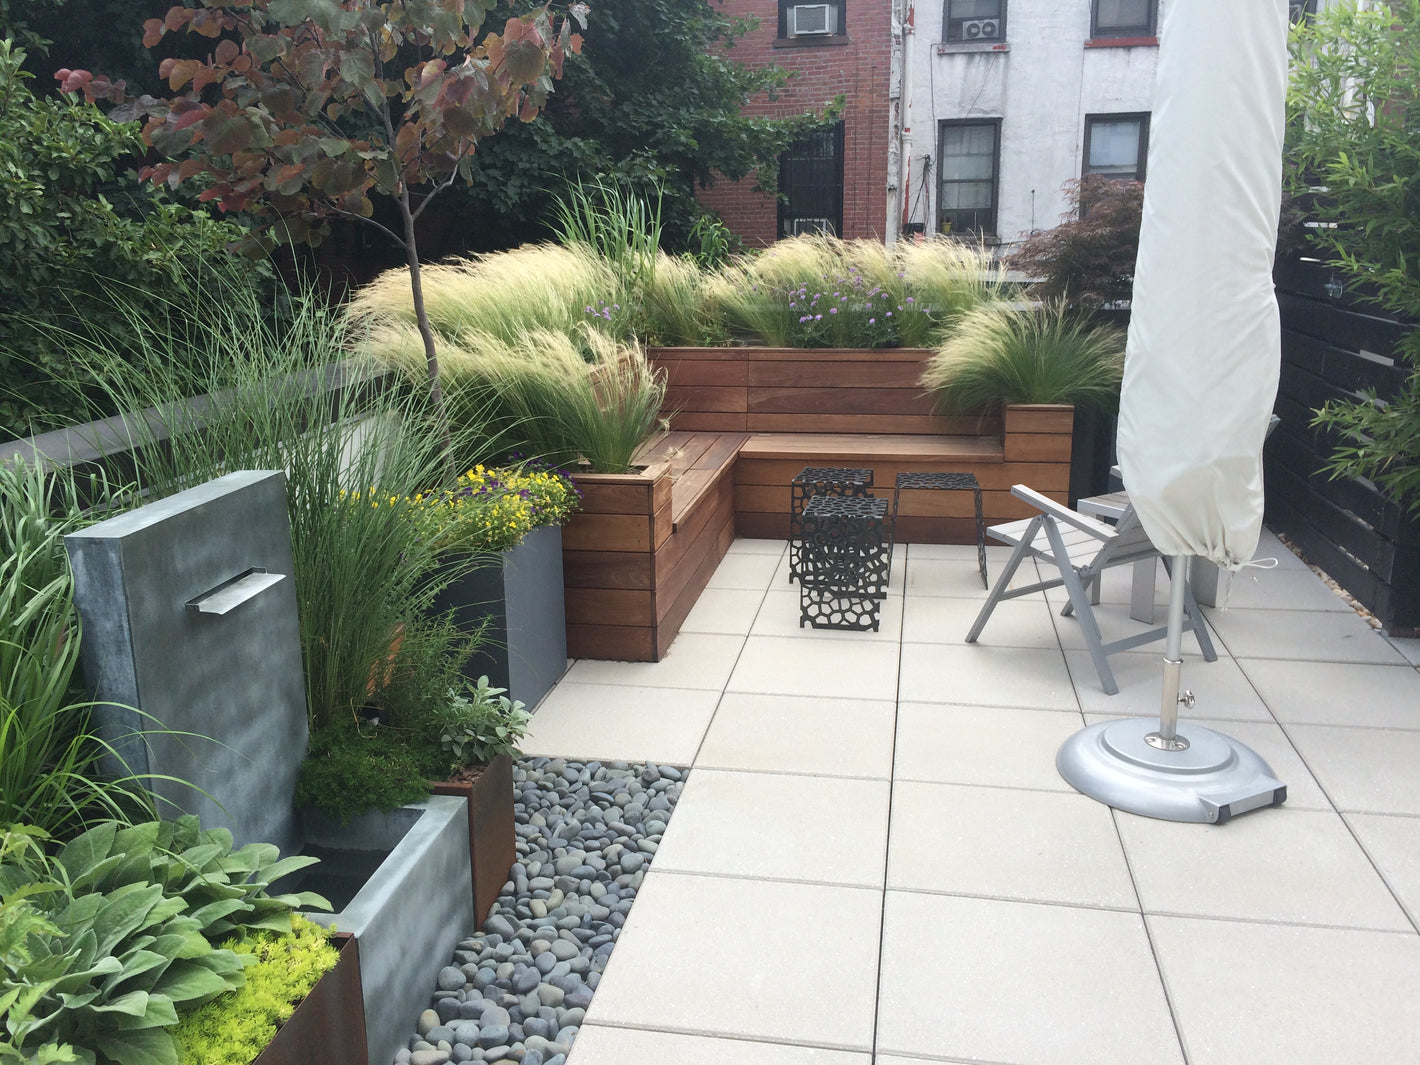 Custom ipe bench with built-in planters and stone waterfall with beach stones created by TCSC